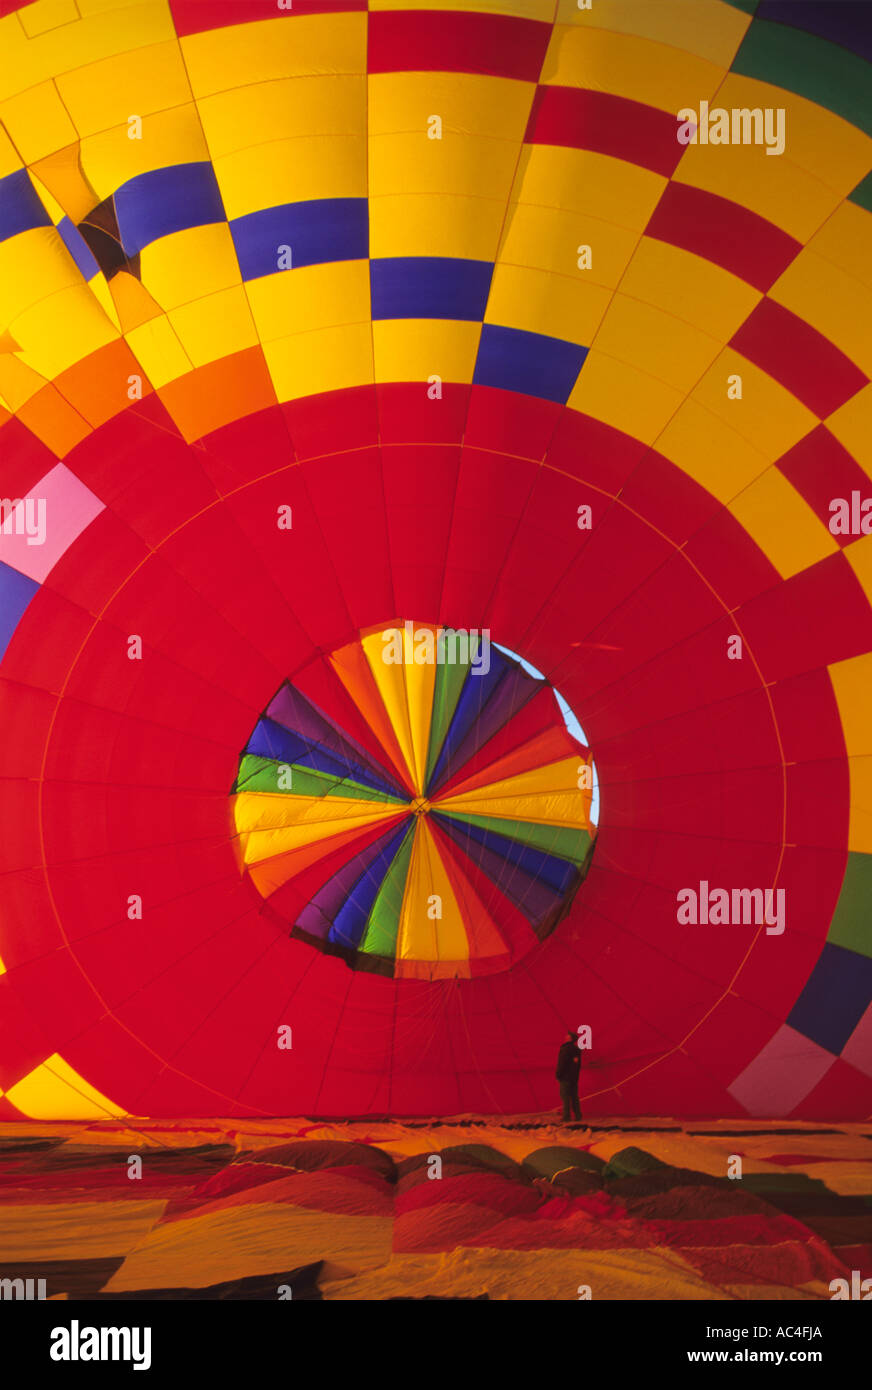 Interior of a hot air balloon being inflated in Albuquerque, New Mexico. Stock Photo